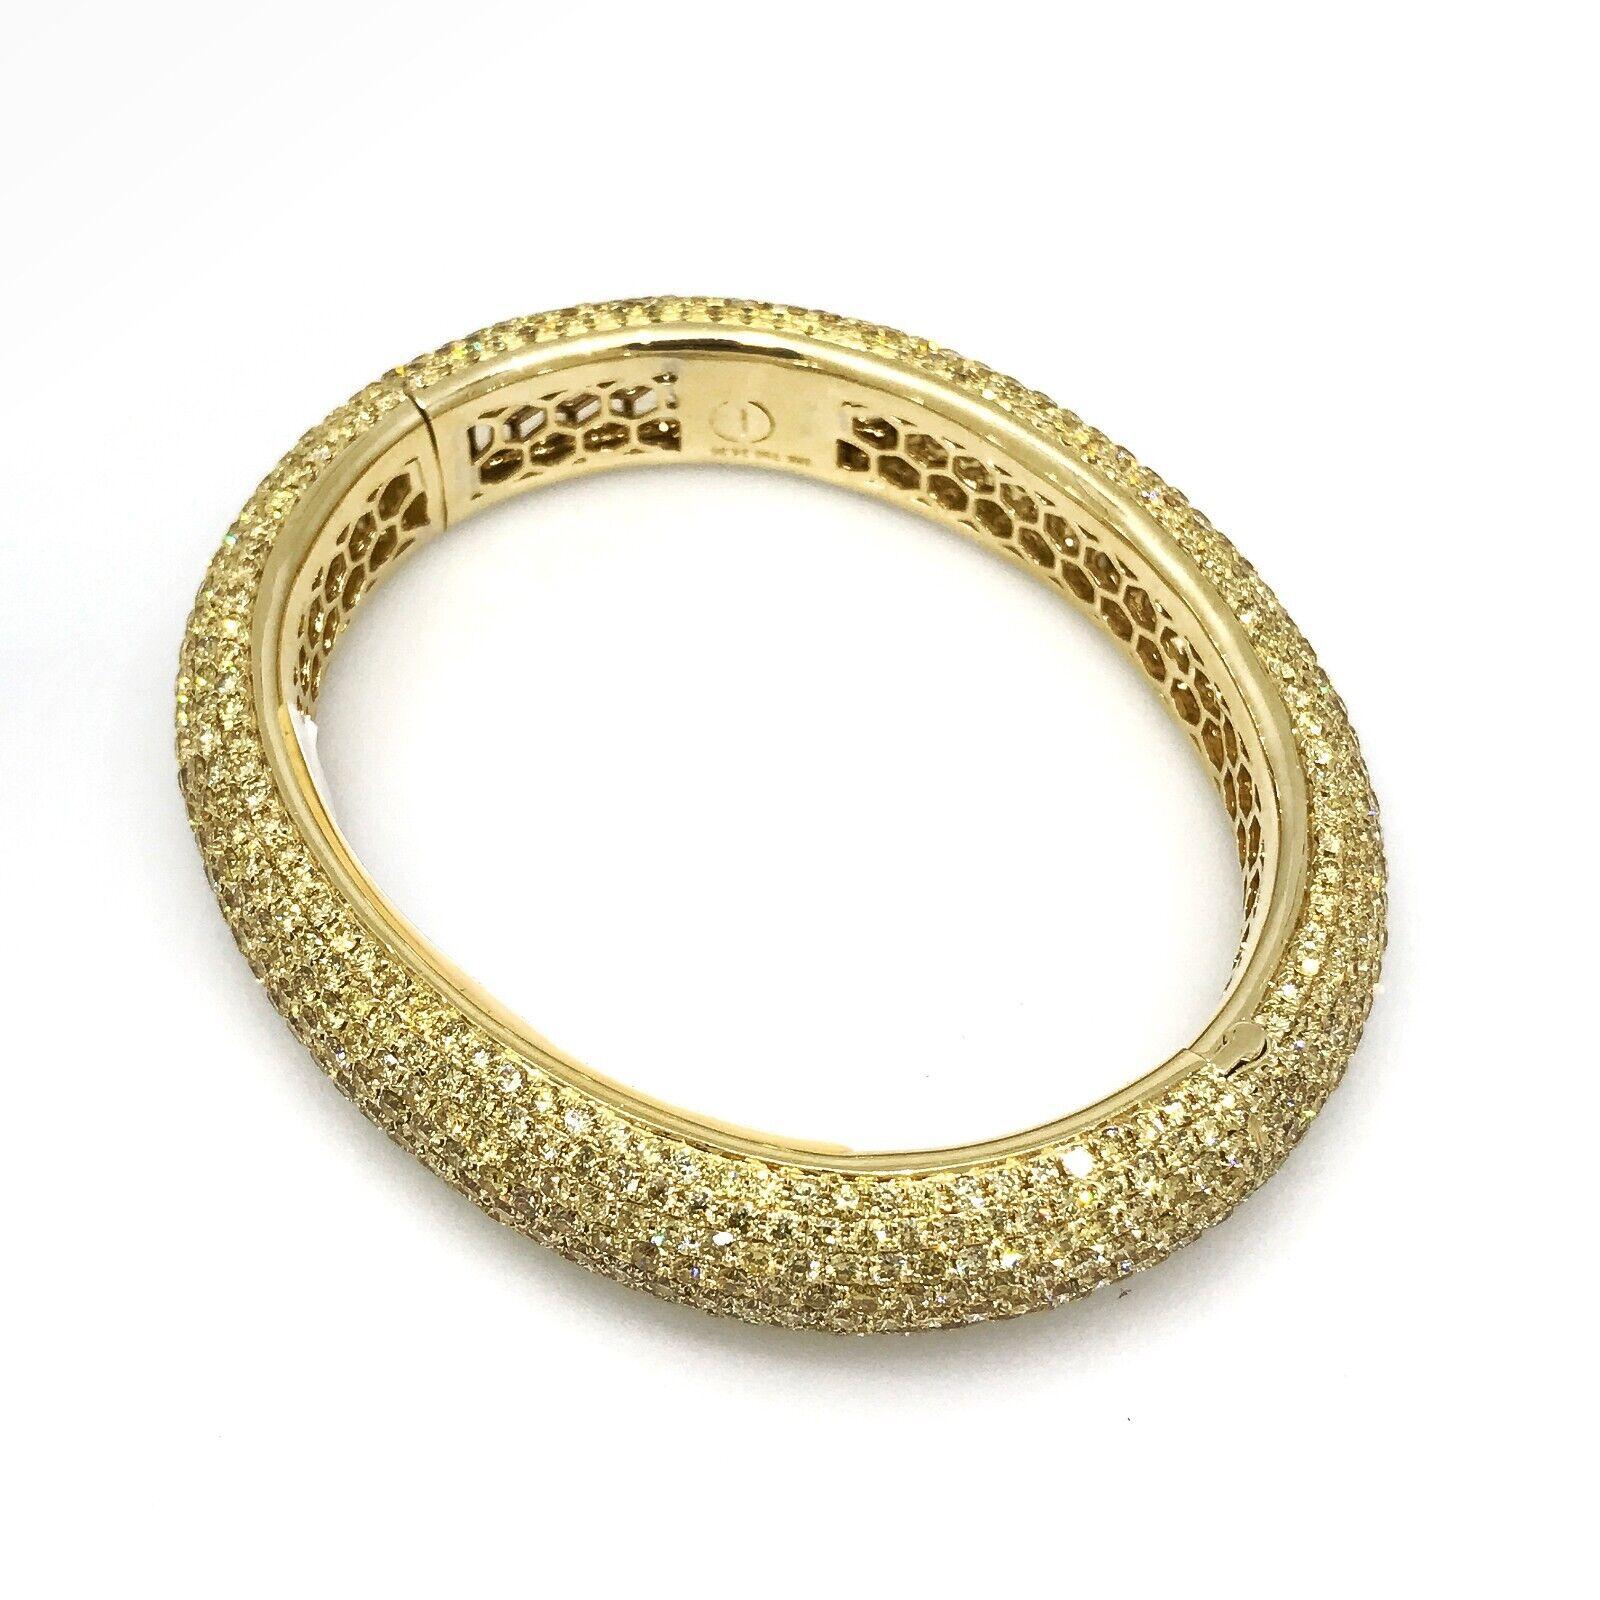 Round Cut Natural Yellow Diamond Pave Eternity Bracelet 24.36 Carats in 18k Yellow Gold For Sale